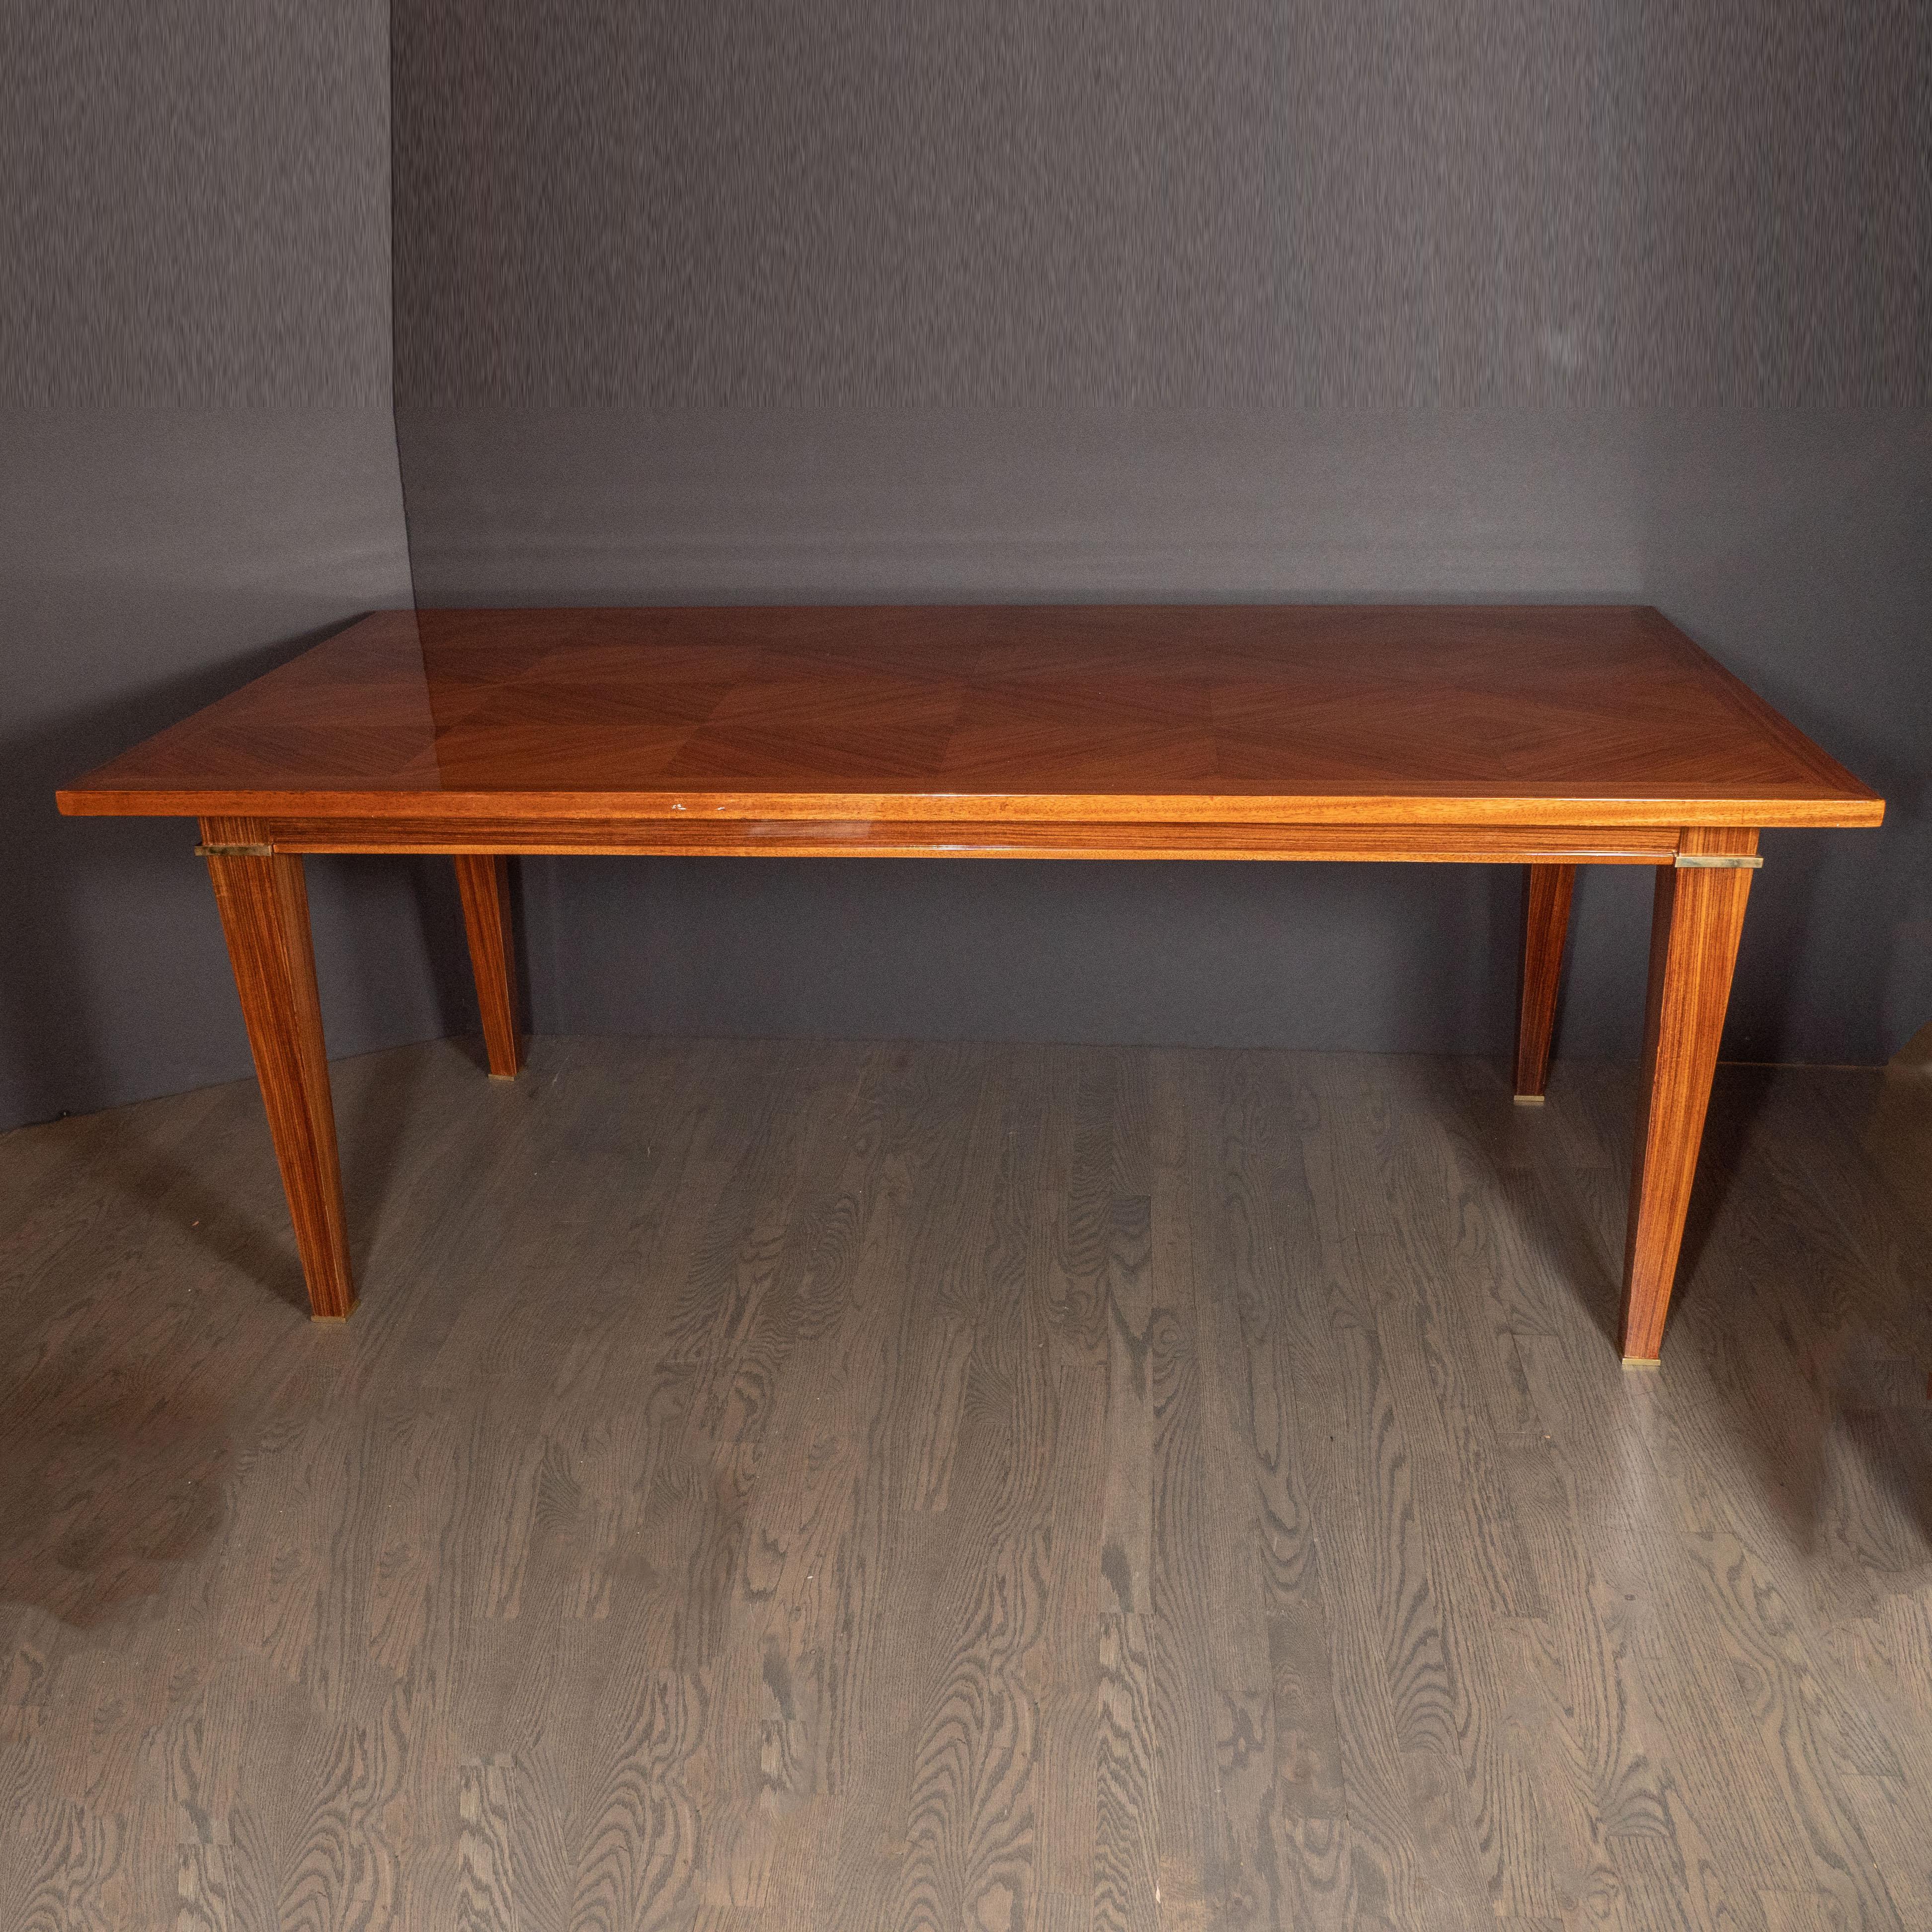 This elegant Art Deco Directoire style table was crafted in France, circa 1940. It features a stunning walnut top- the woodgrain has been bookmatched to form a stunning mosaic of geometric triangular forms bordered along the perimeter by bands of